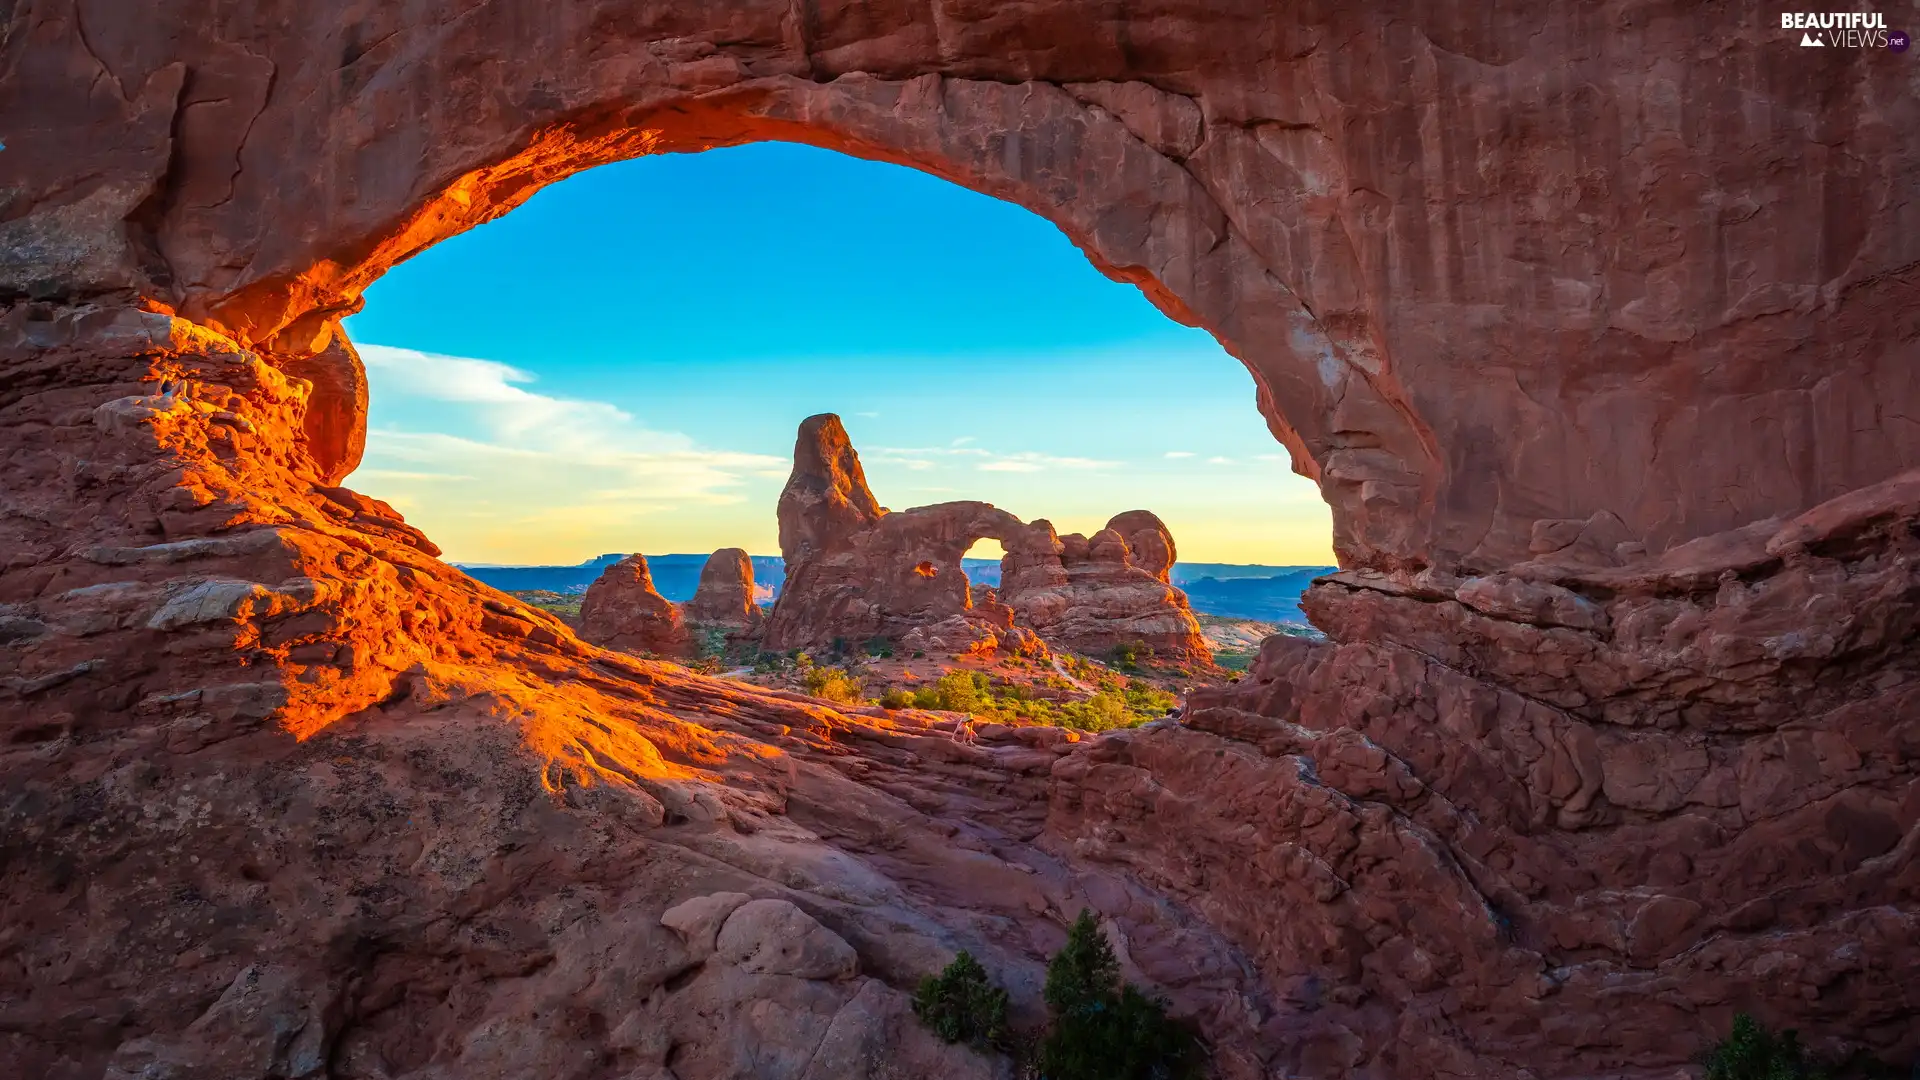 Utah State, The United States, Arches National Park, Rock Formations, rocks